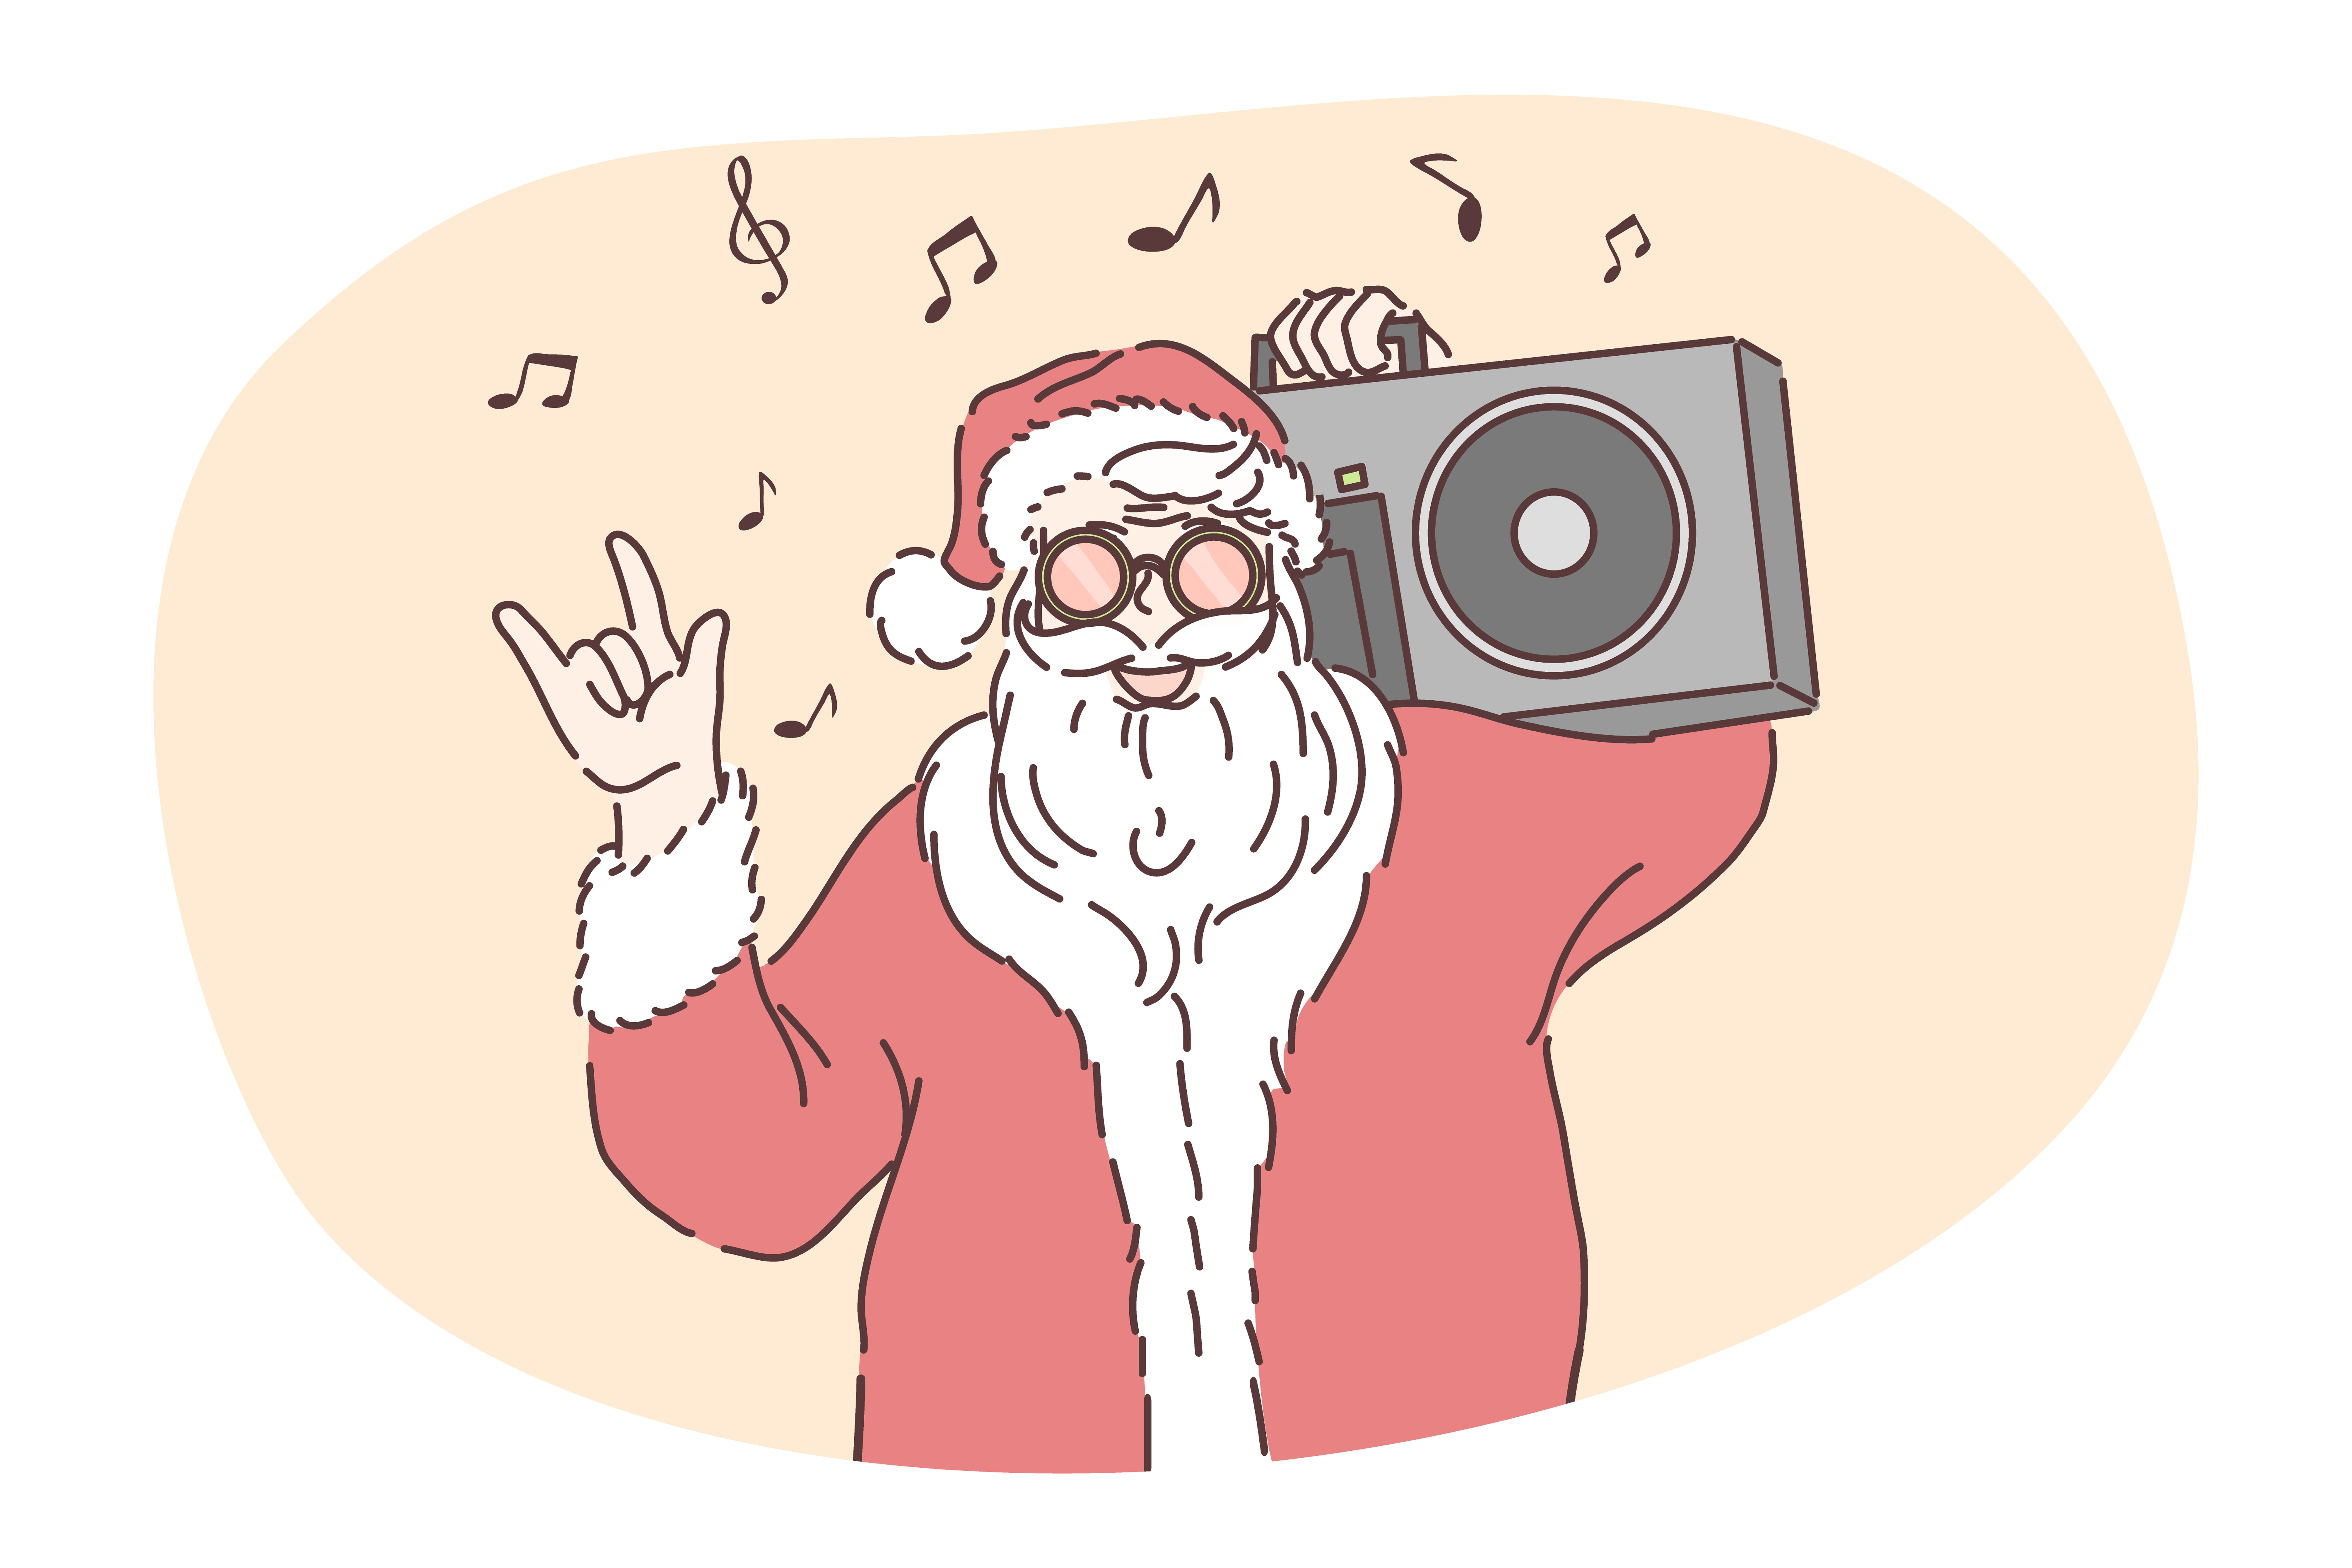 Funny Santa, celebrating Christmas and New year holidays concept. Funny hipster brutal Santa cartoon character in traditional red hat and costume listening to pop music and showing cool gesture . Funny Santa, celebrating Christmas and New year holidays concept